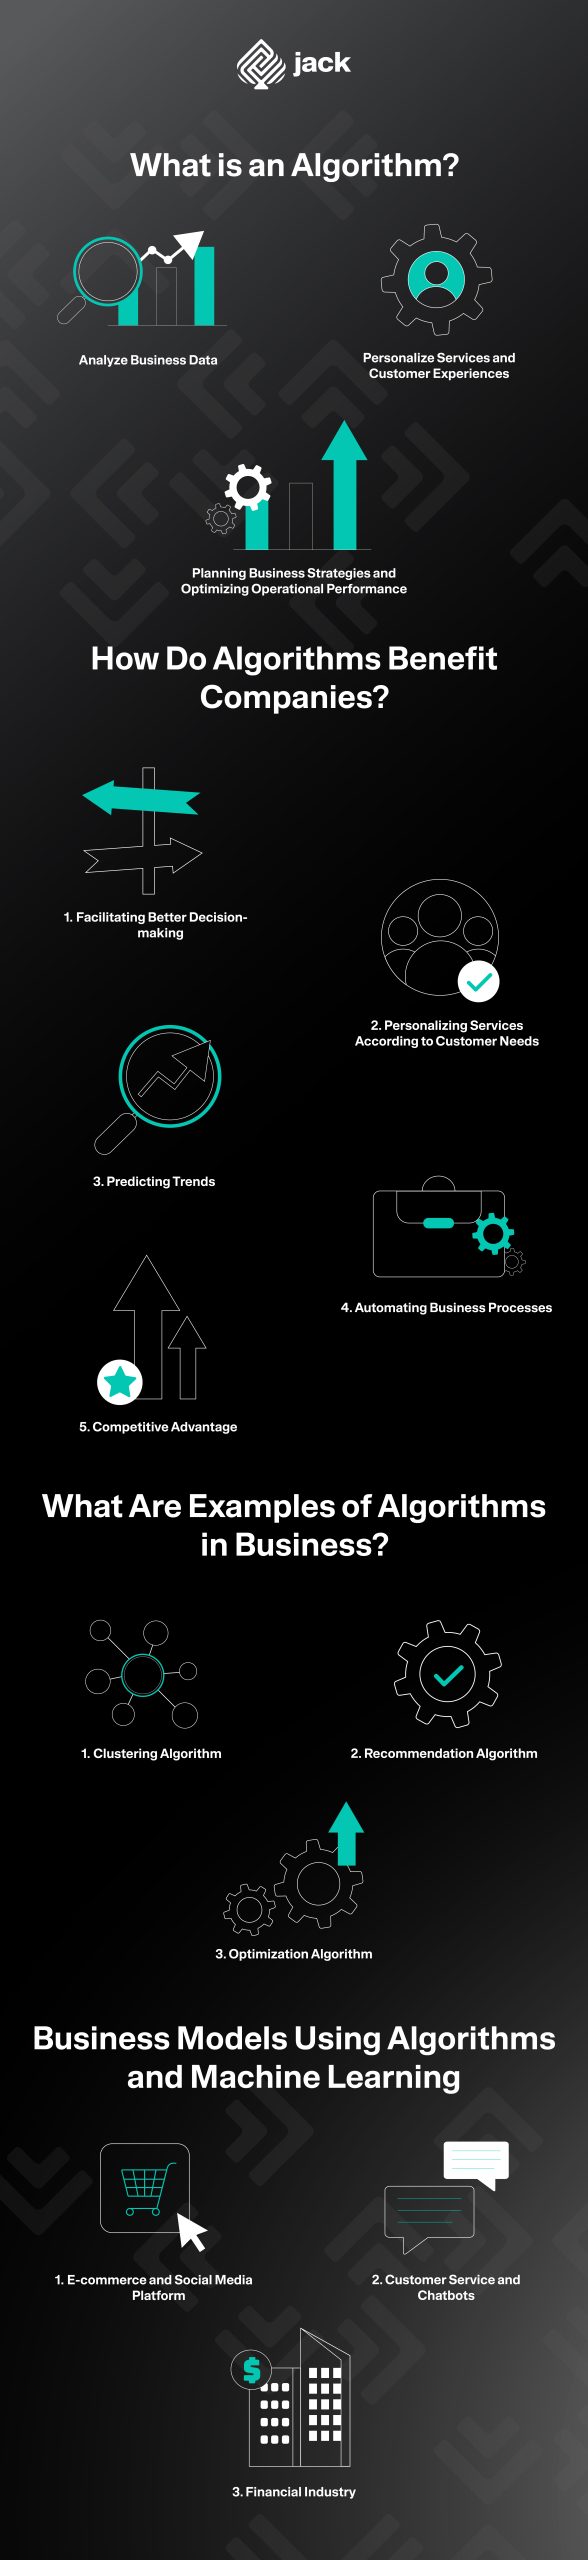 How Are Algorithms Used in Business Today? Let's Find Out!